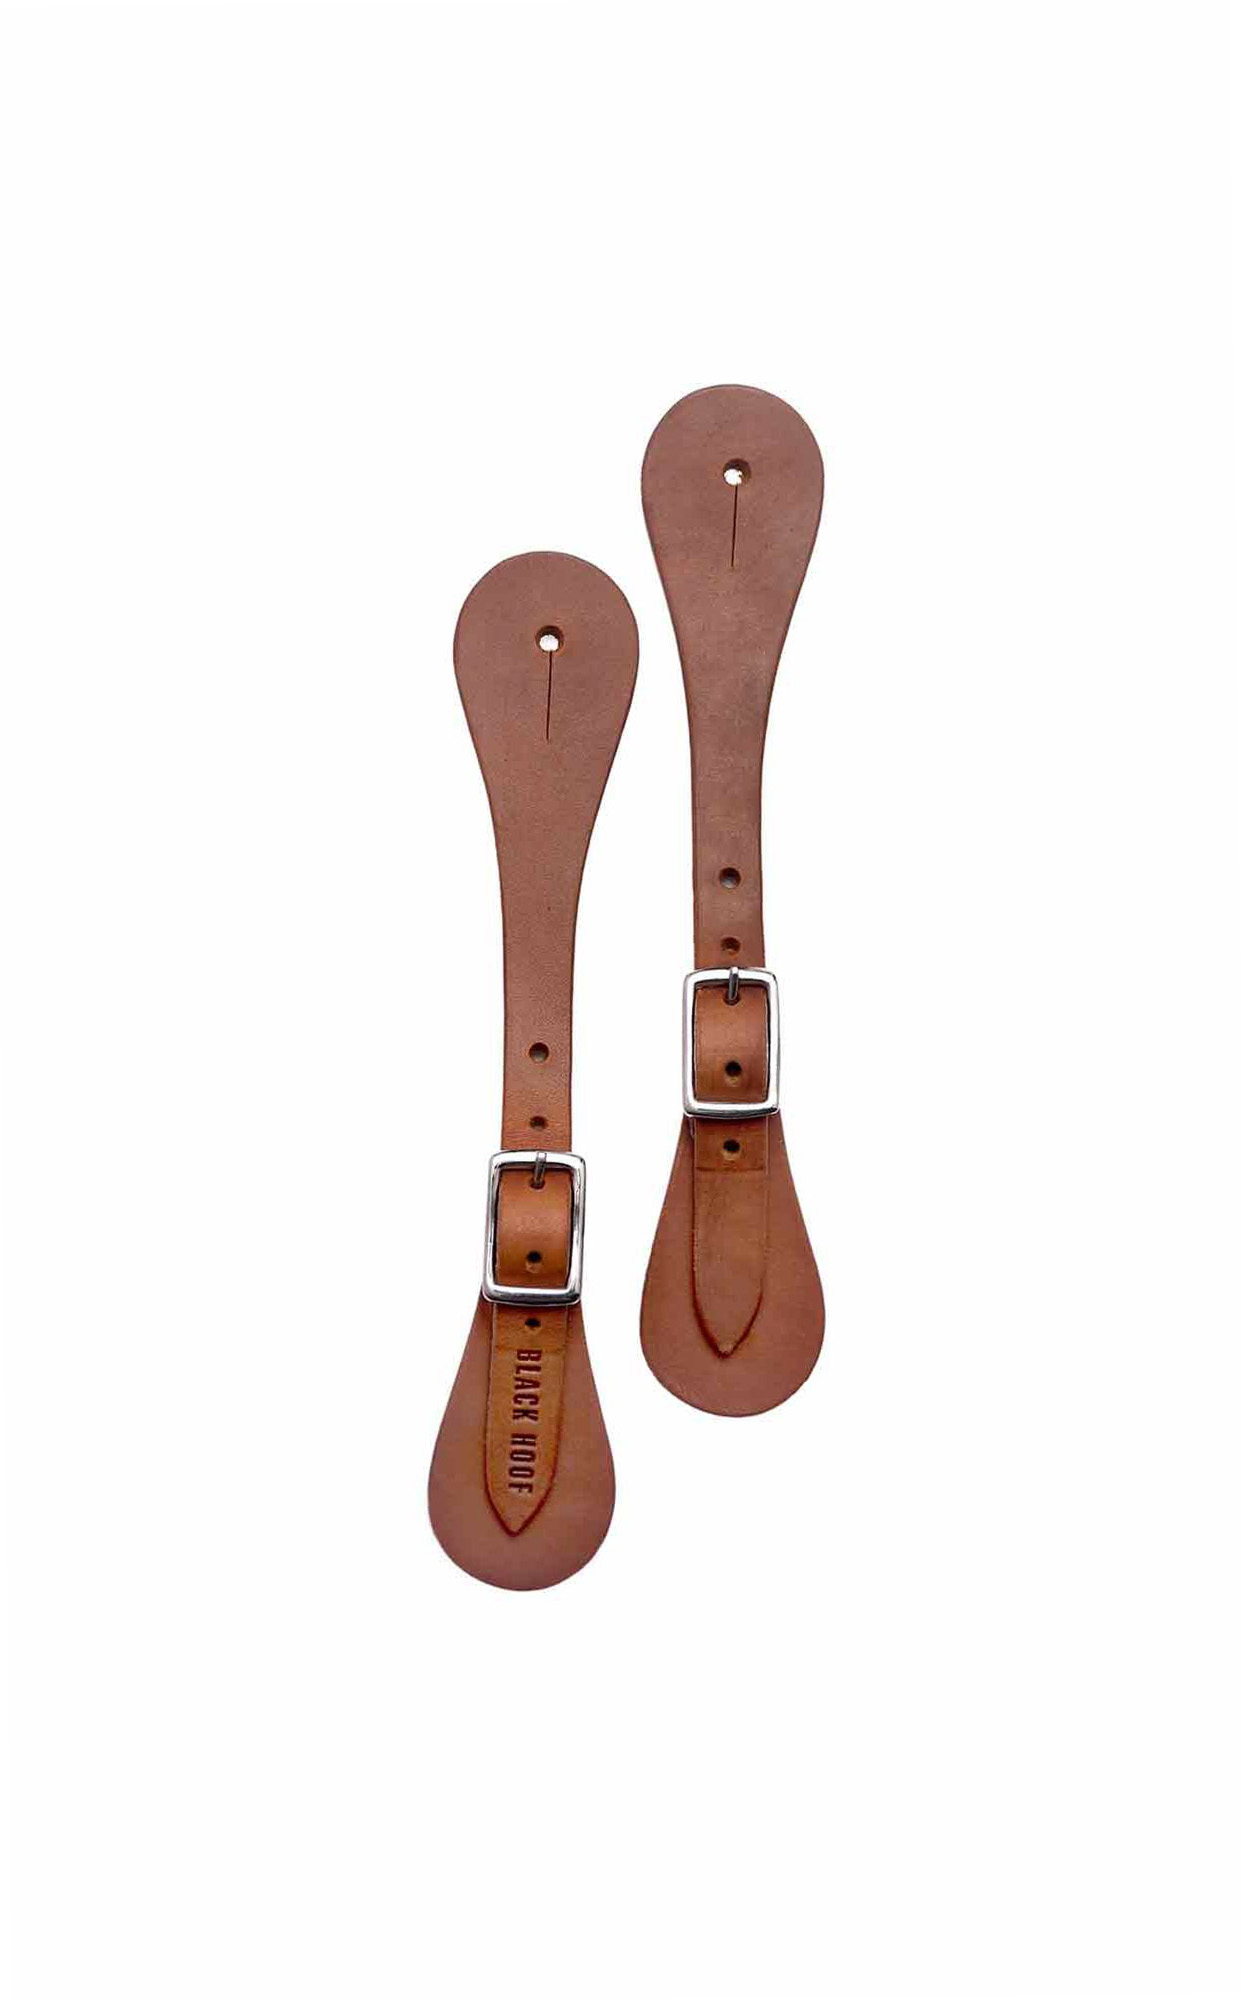 Harness Leather Spur Straps Western Men Adjustable Boot Straps Single Ply Spur Straps for Boots Western Women Men Horse Riding